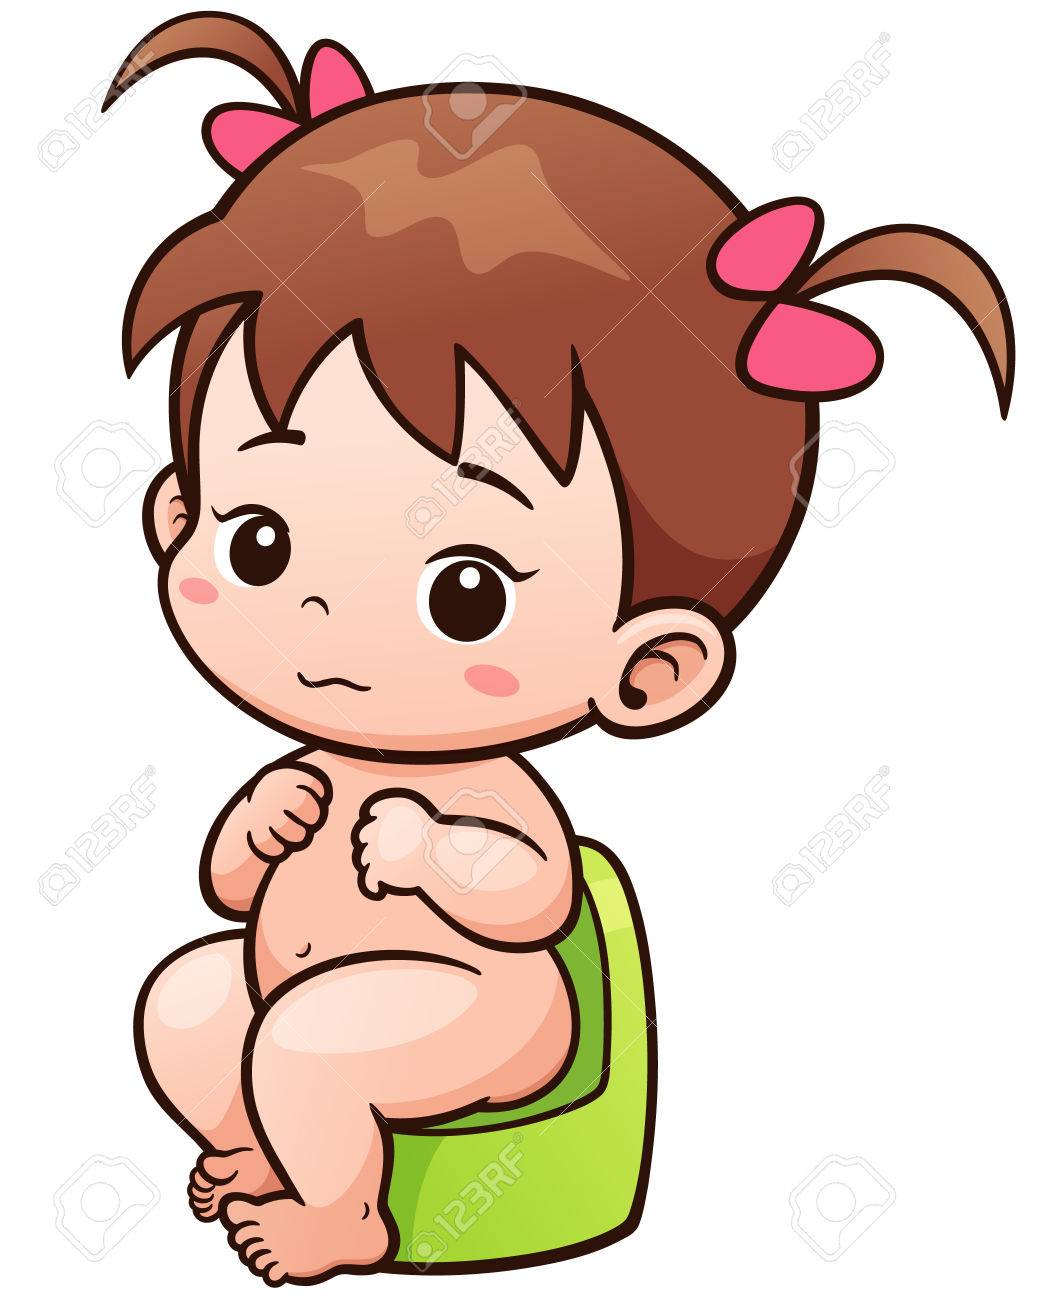 Cute baby clipart 4 » Clipart Station.